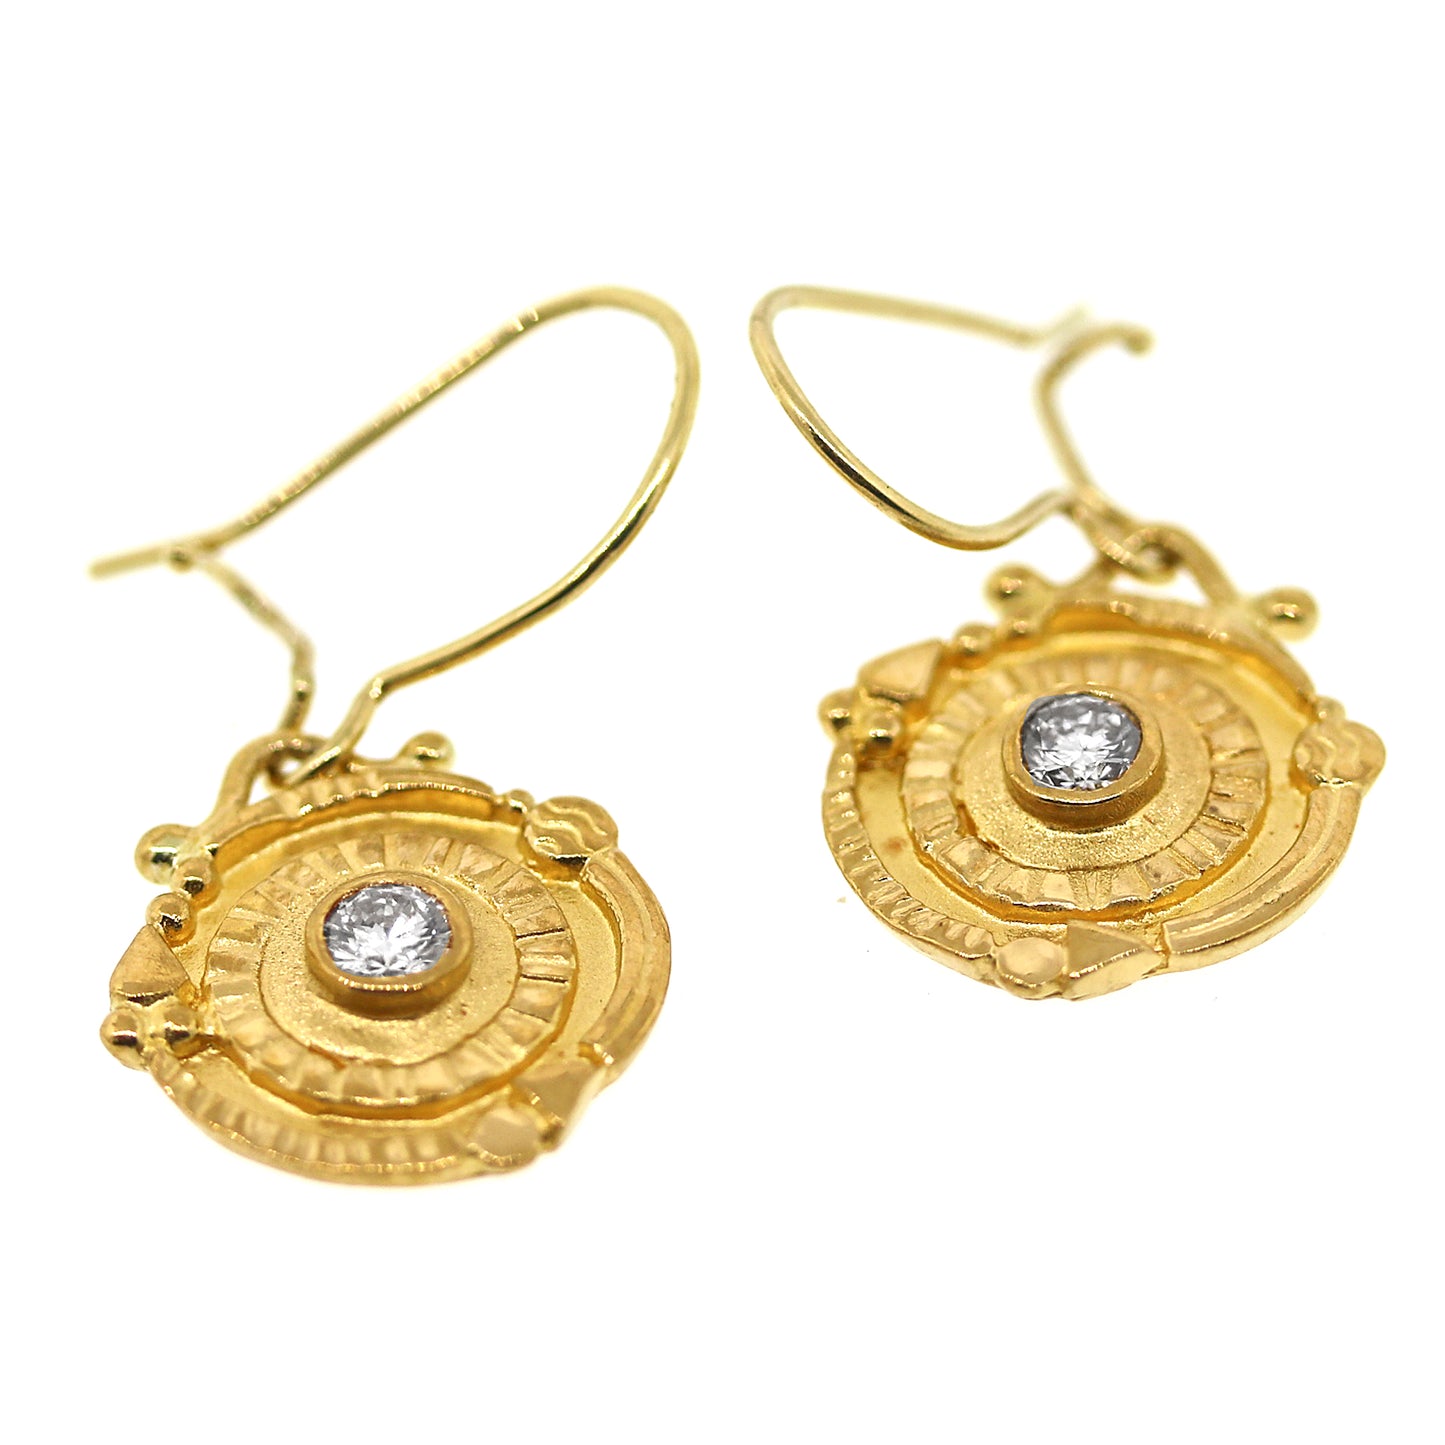 Solid 18 kt and 22 kt Yellow Gold Coin Designed Earrings with Diamond